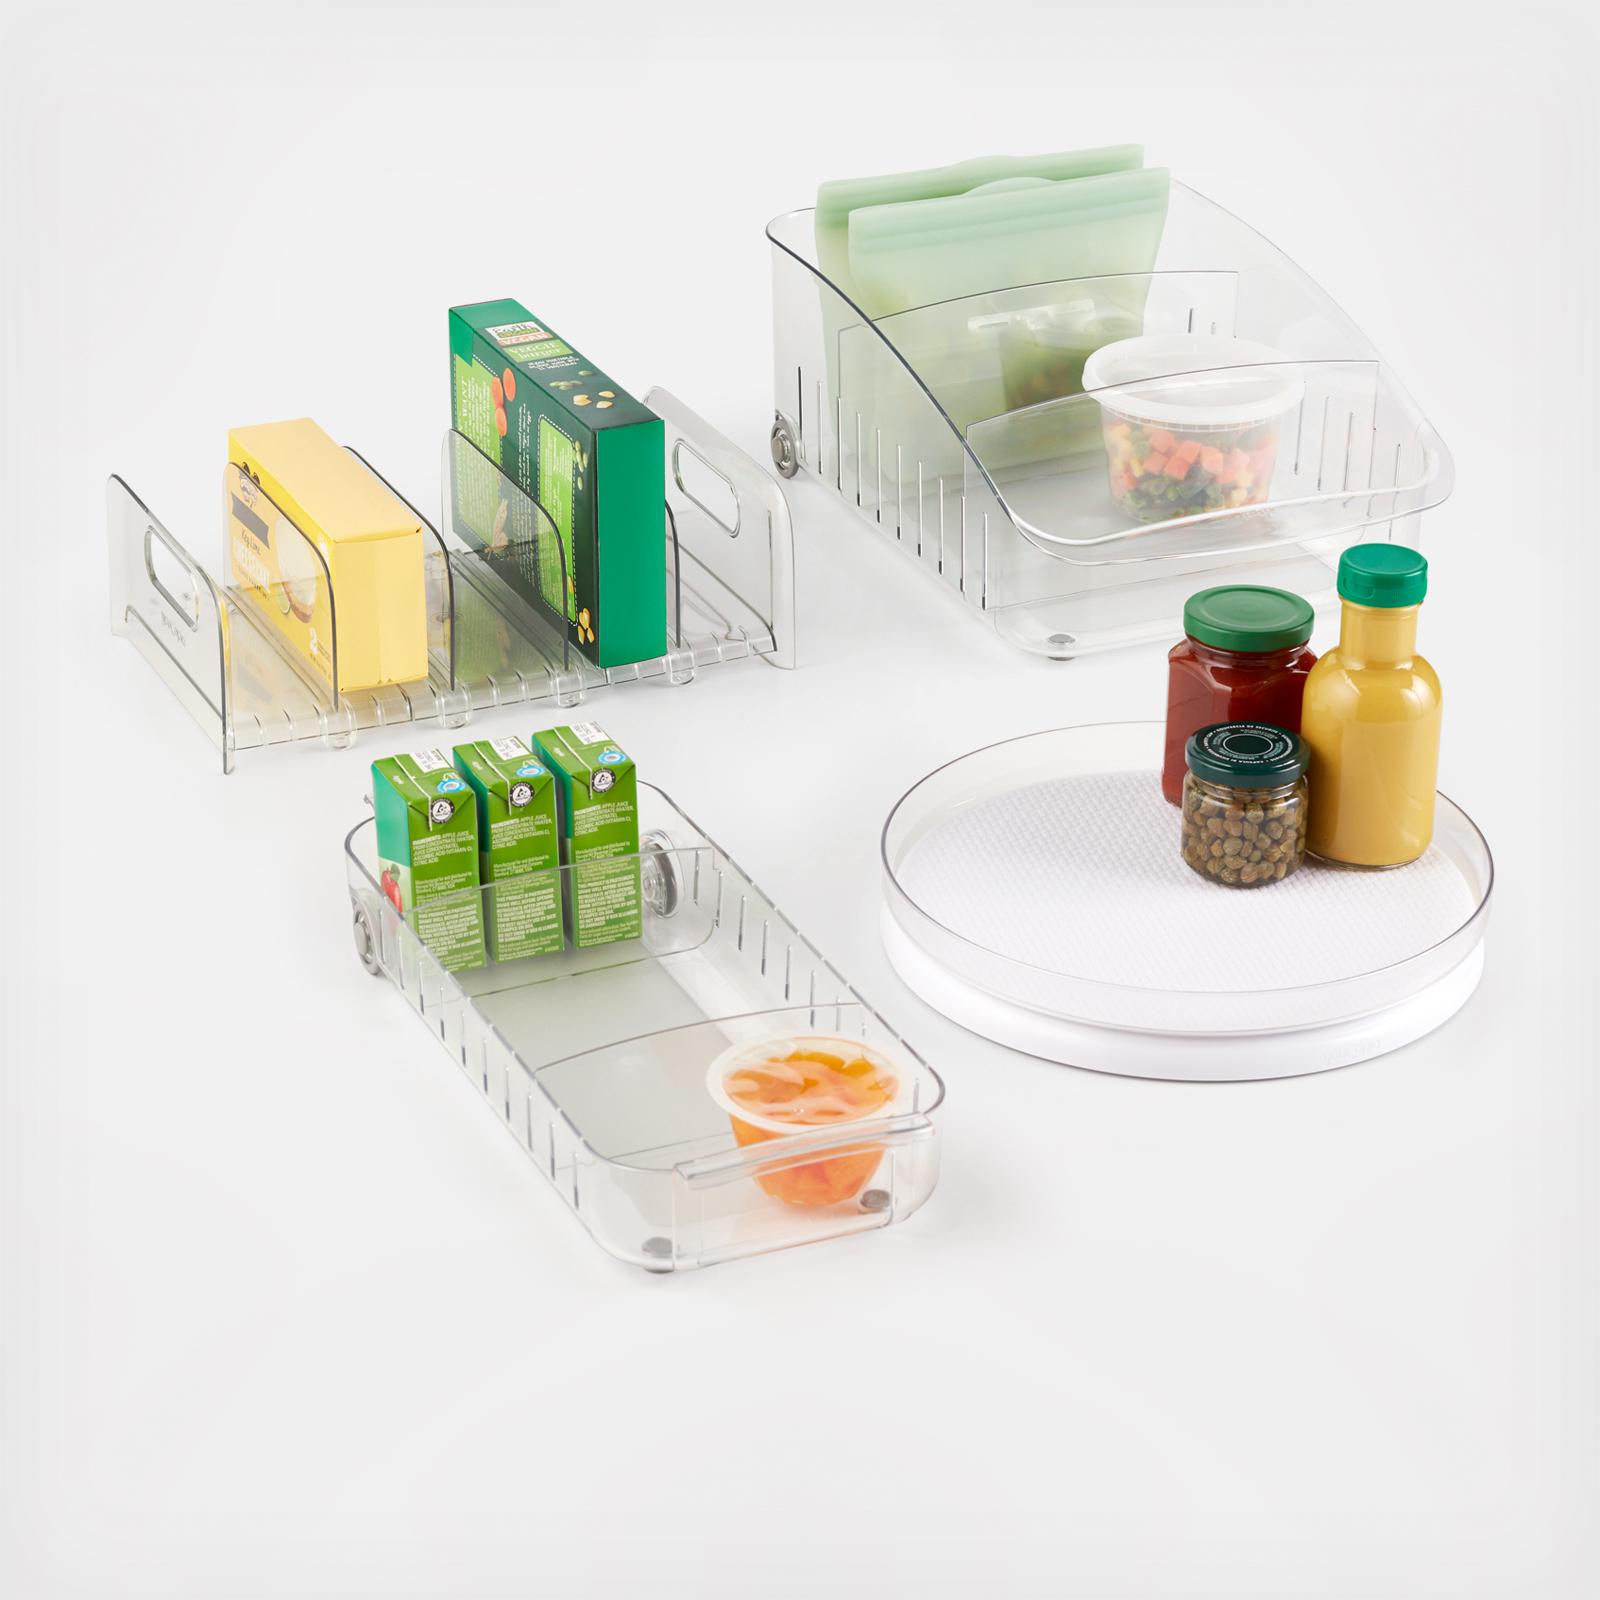 These $15 YouCopia Freezer Containers Store Liquids Without Making a Mess